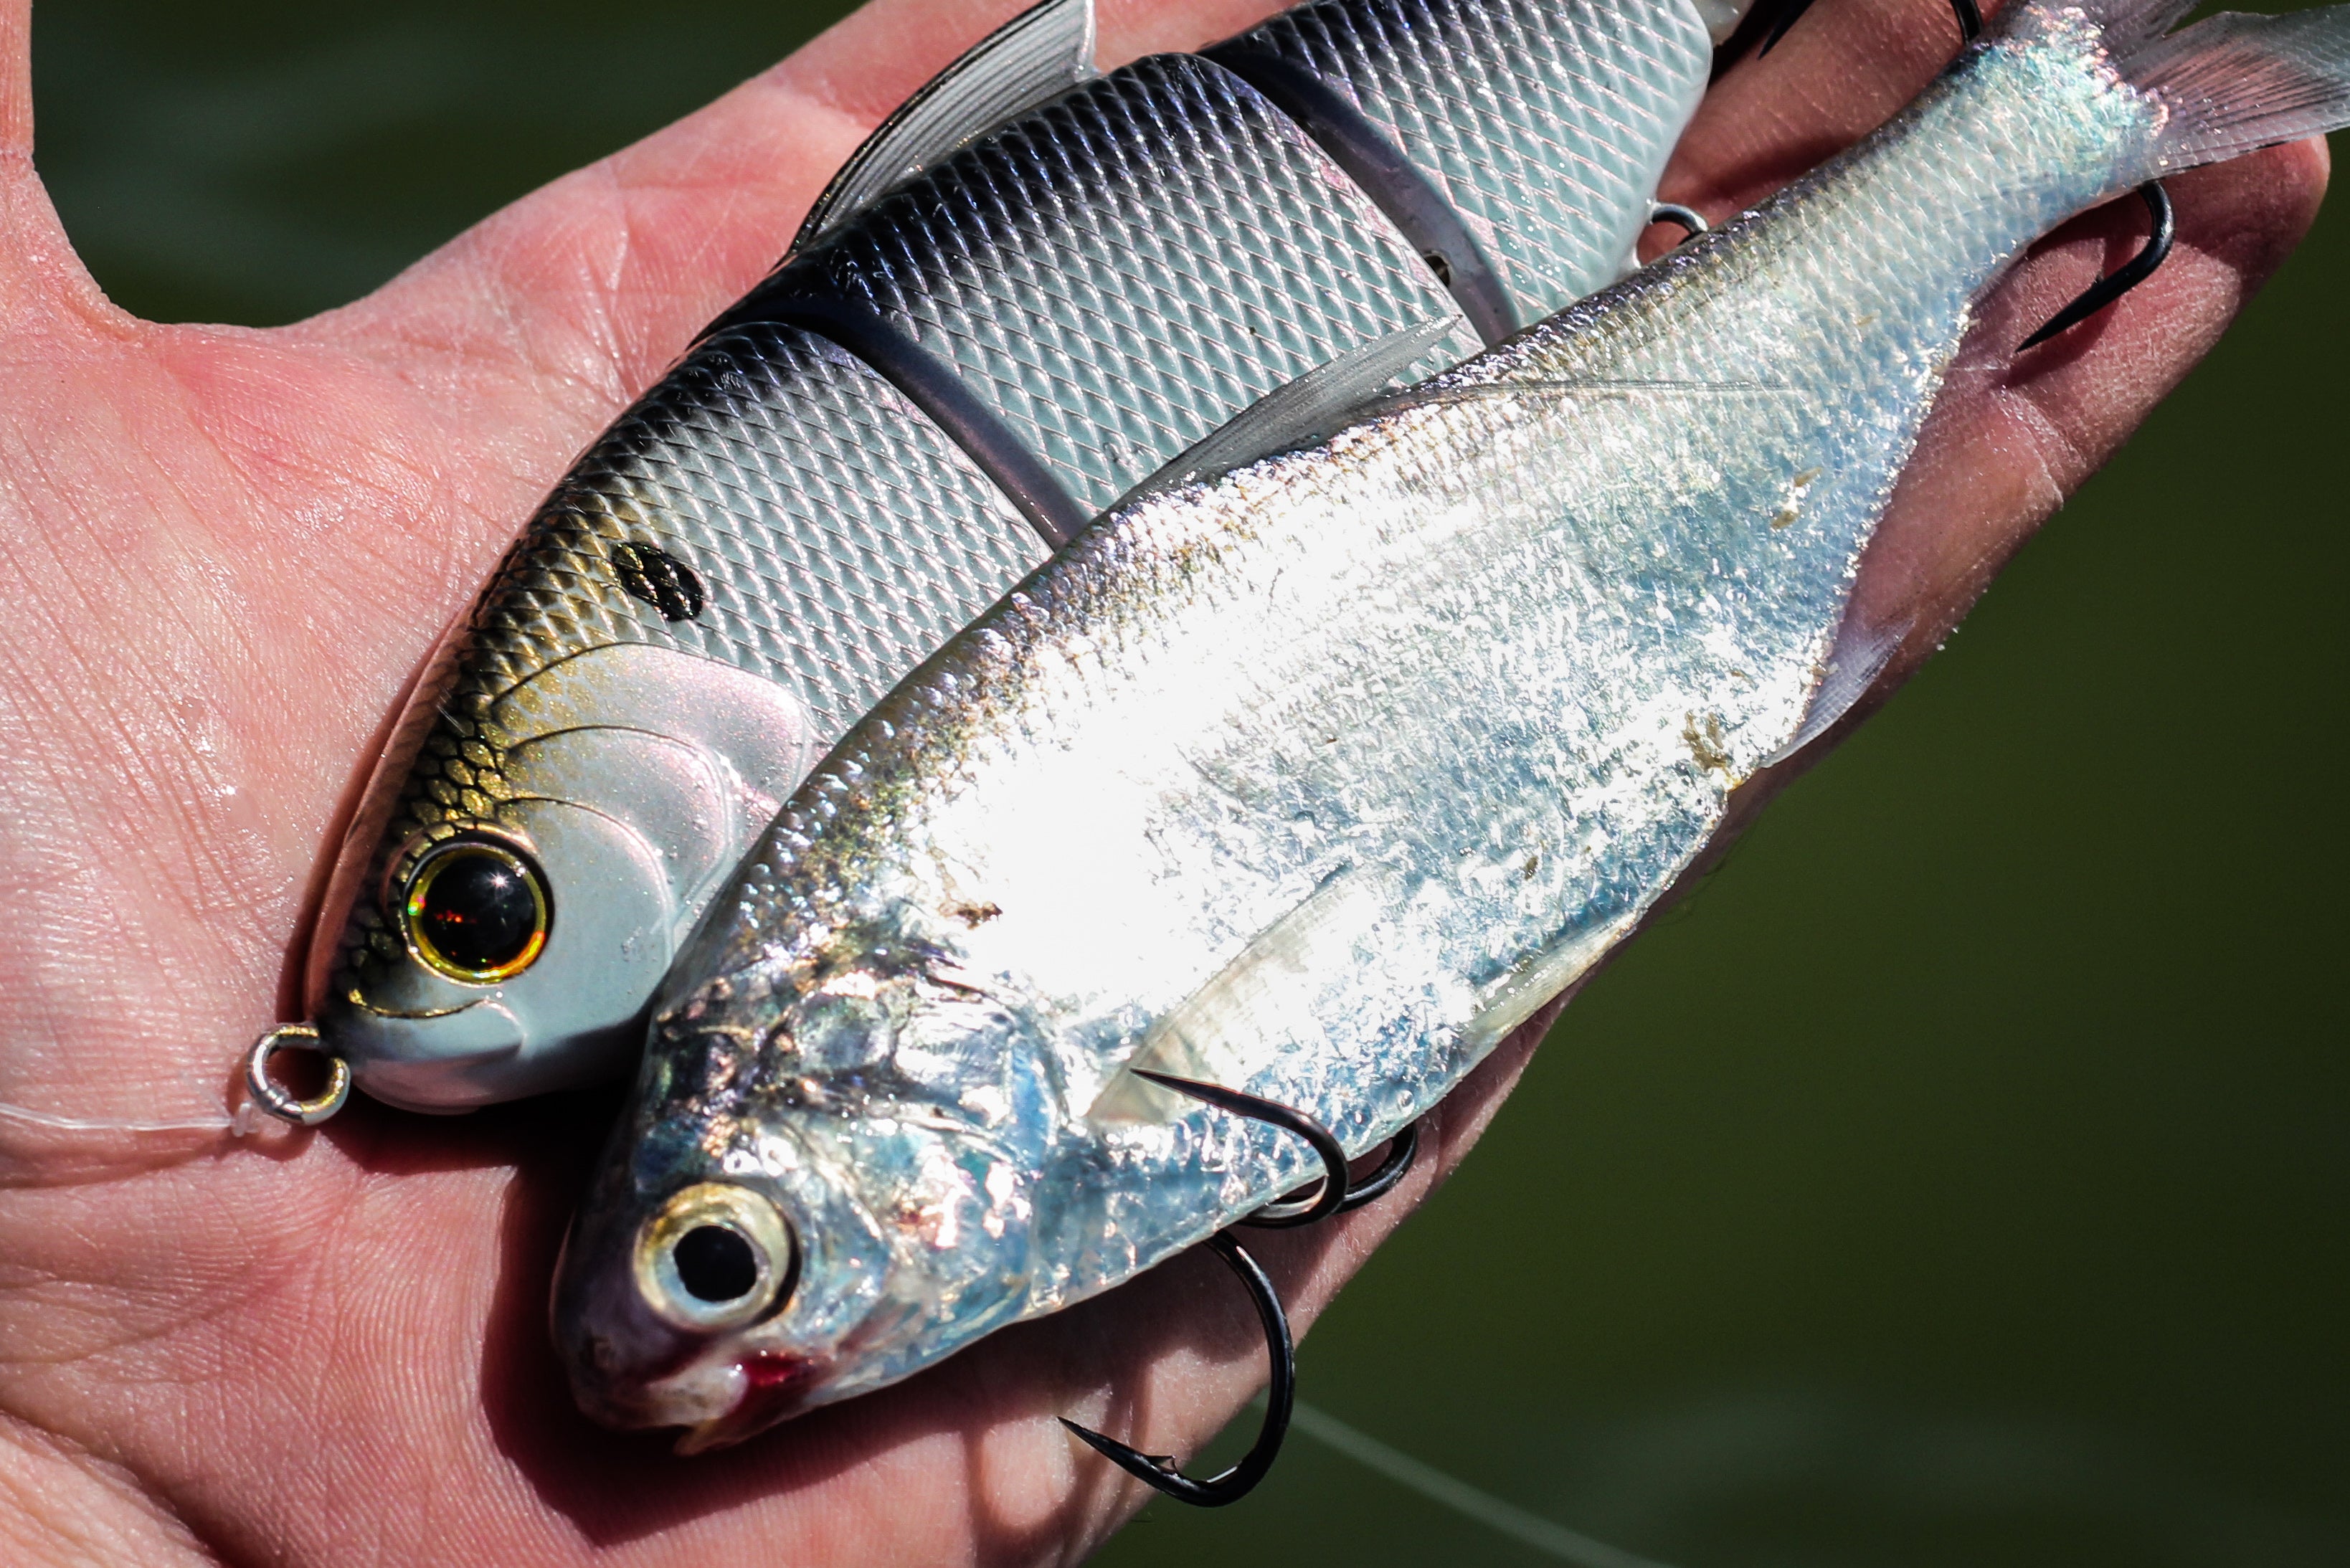 When gizzard shad are on the menu, our '4k Shad' Trace swimbait is a  perfect way to match the hatch. #bass #6thsensefishing #6thsense #